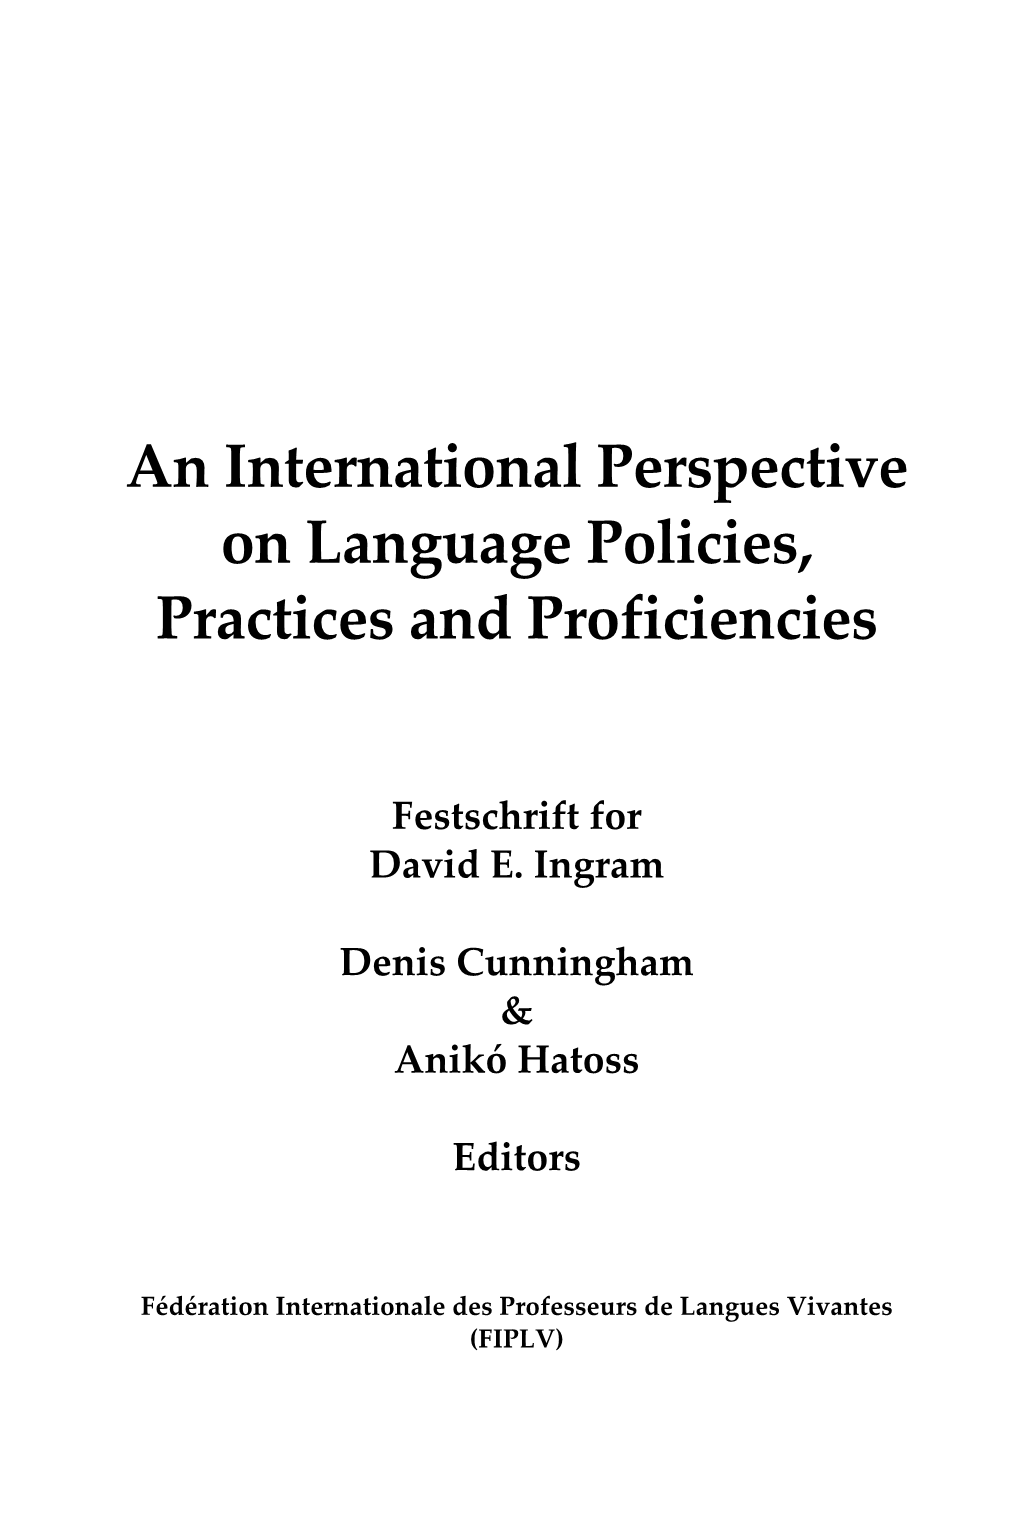 An International Perspective on Language Policies, Practices and Proficiencies